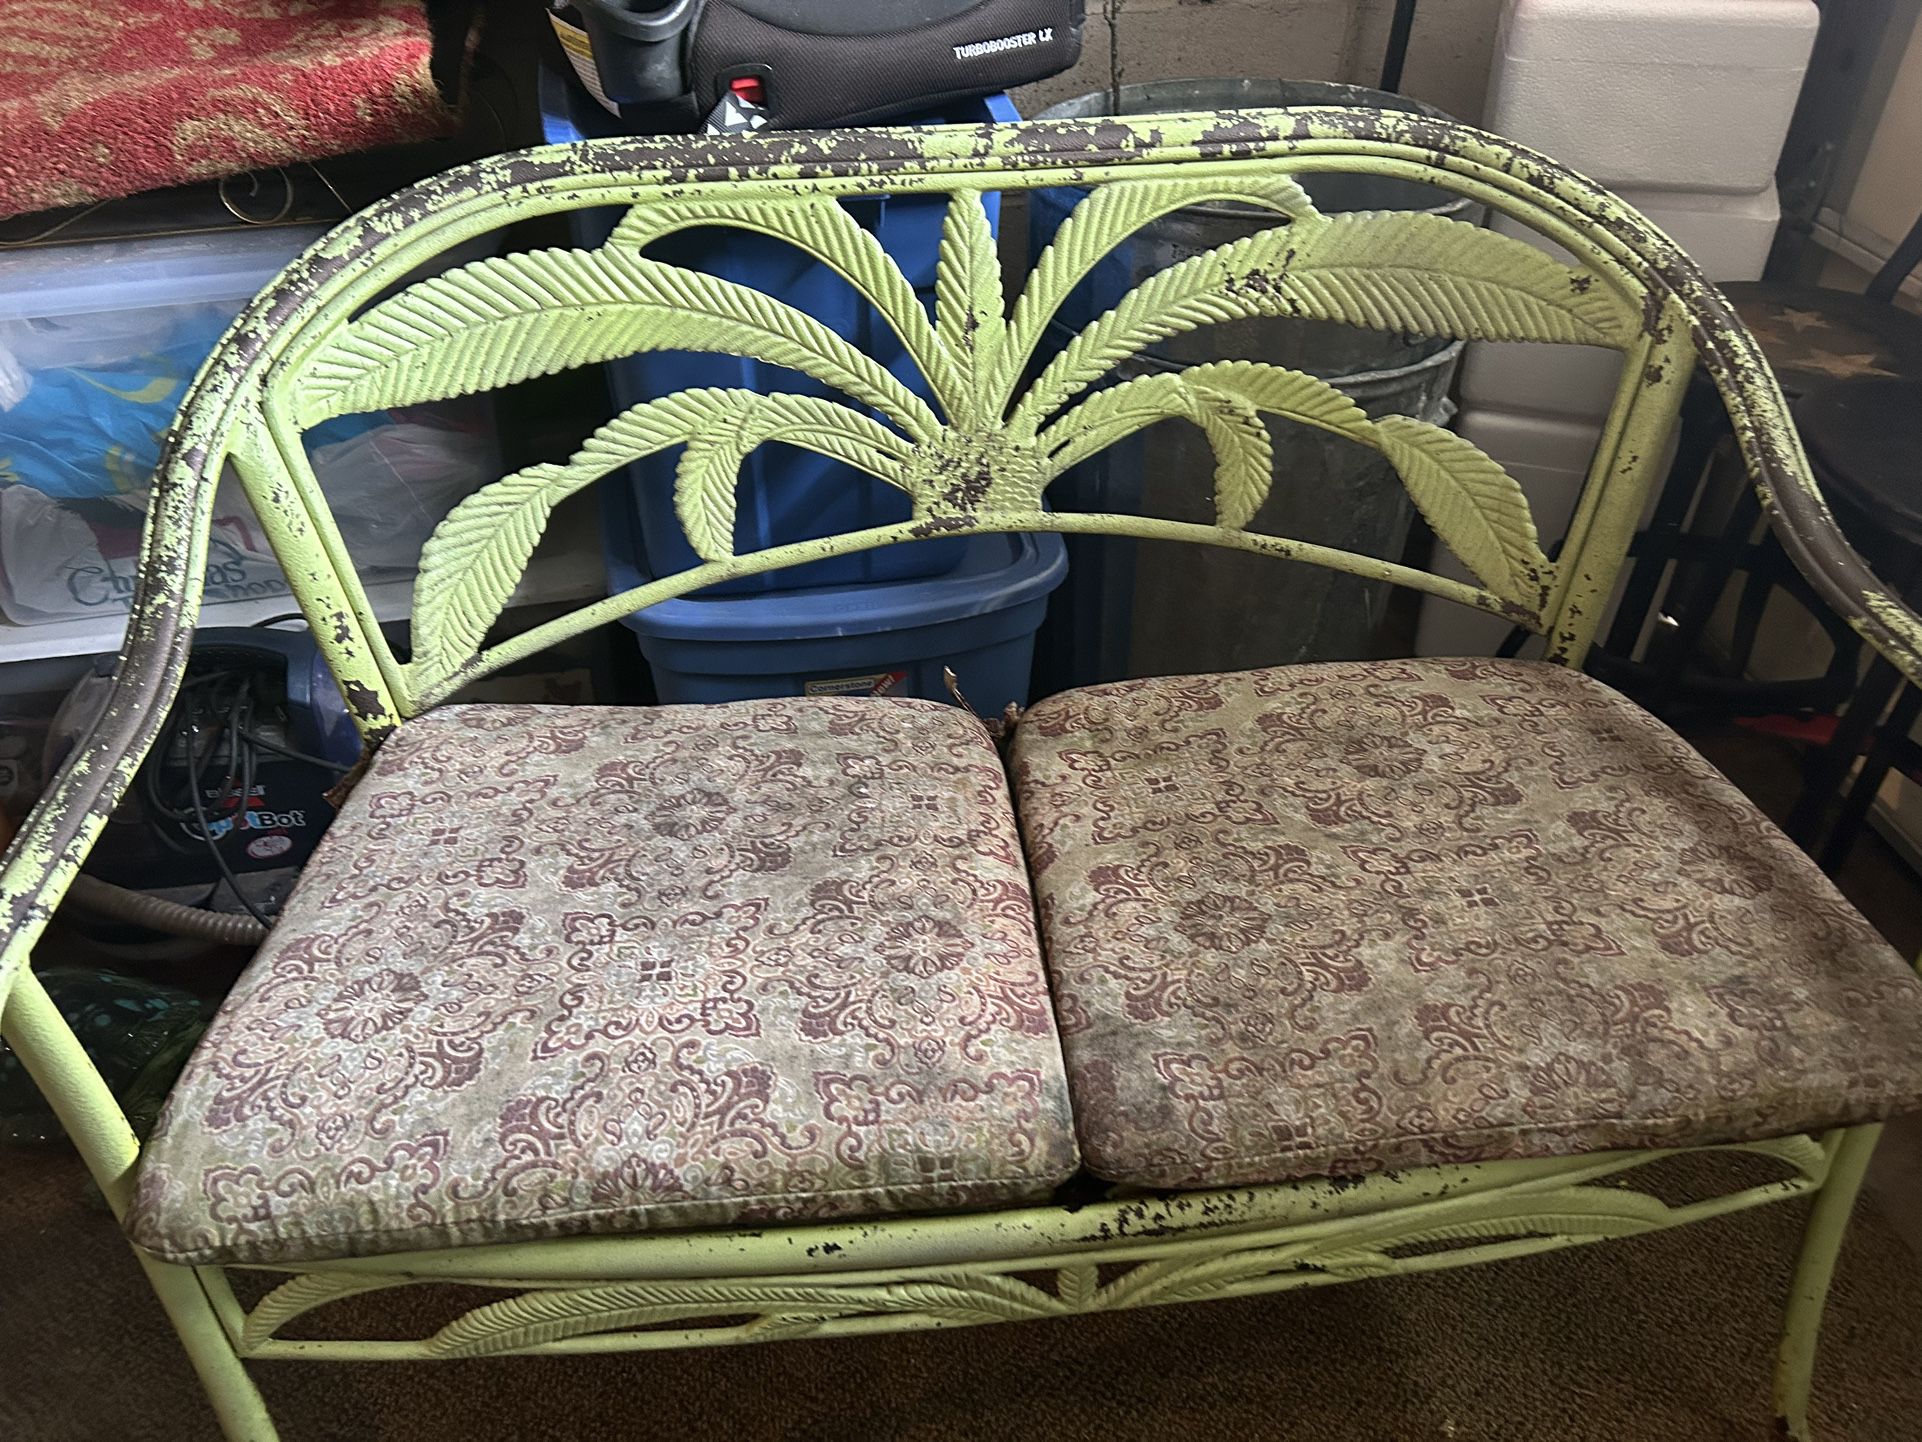 Vintage Metal Bench And 2 Chairs